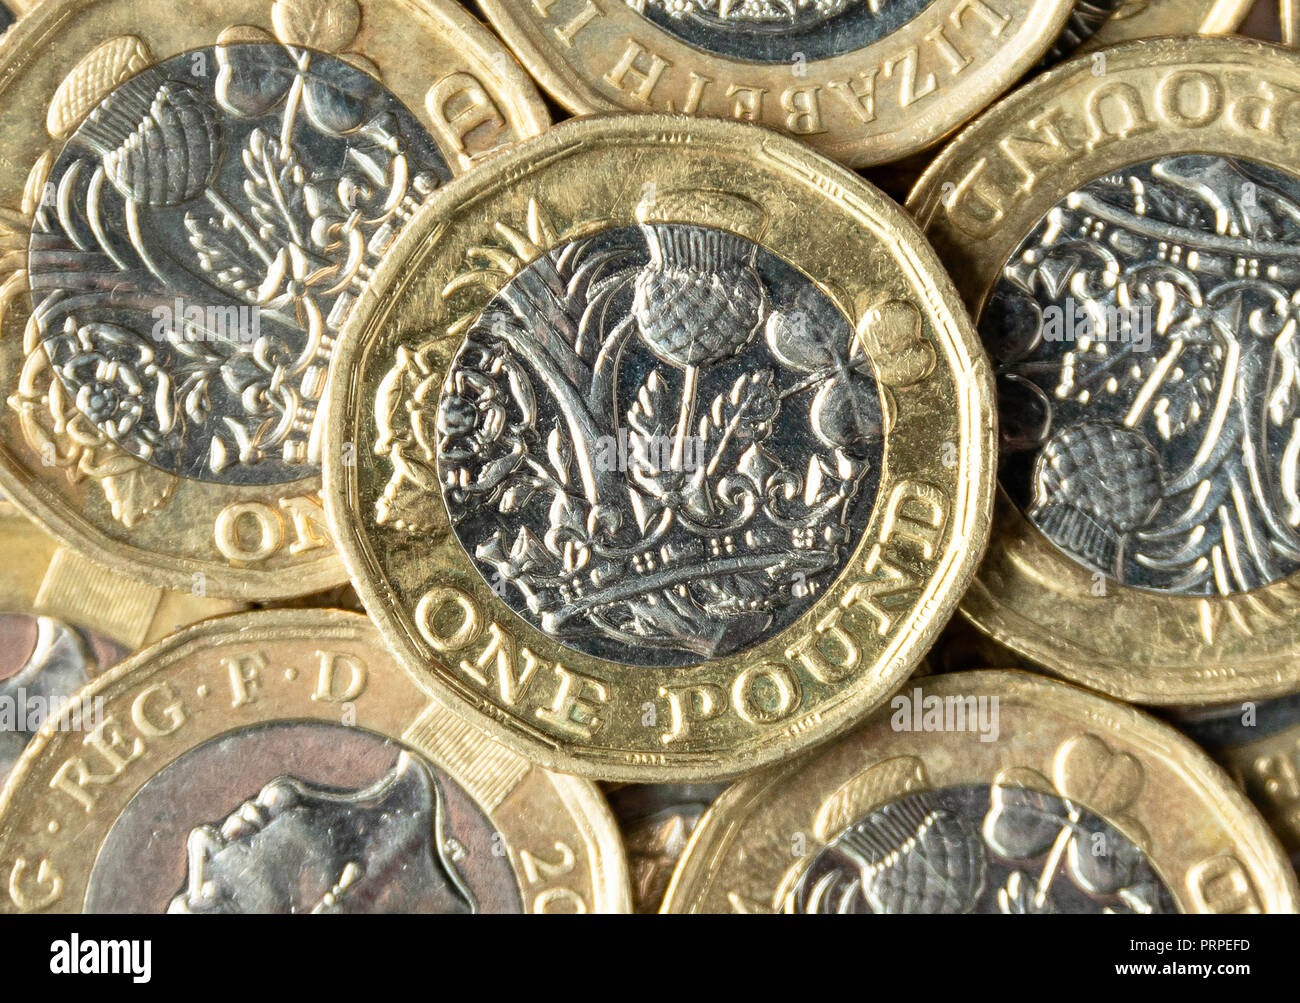 Still-life close-up of British one pound coins, Greater London, England, United Kingdom Stock Photo